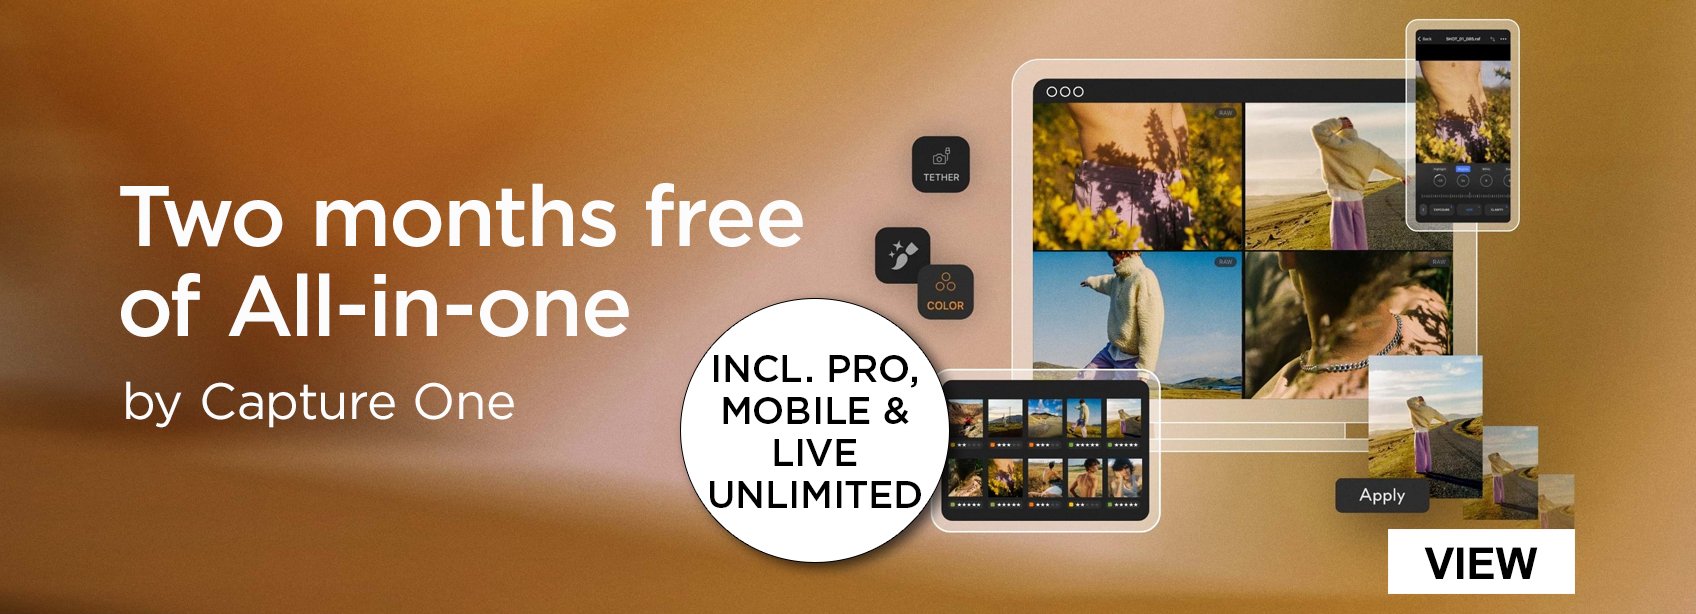 Two months free  of All-in-one by Capture One. Including Pro, mobile and live unlimited